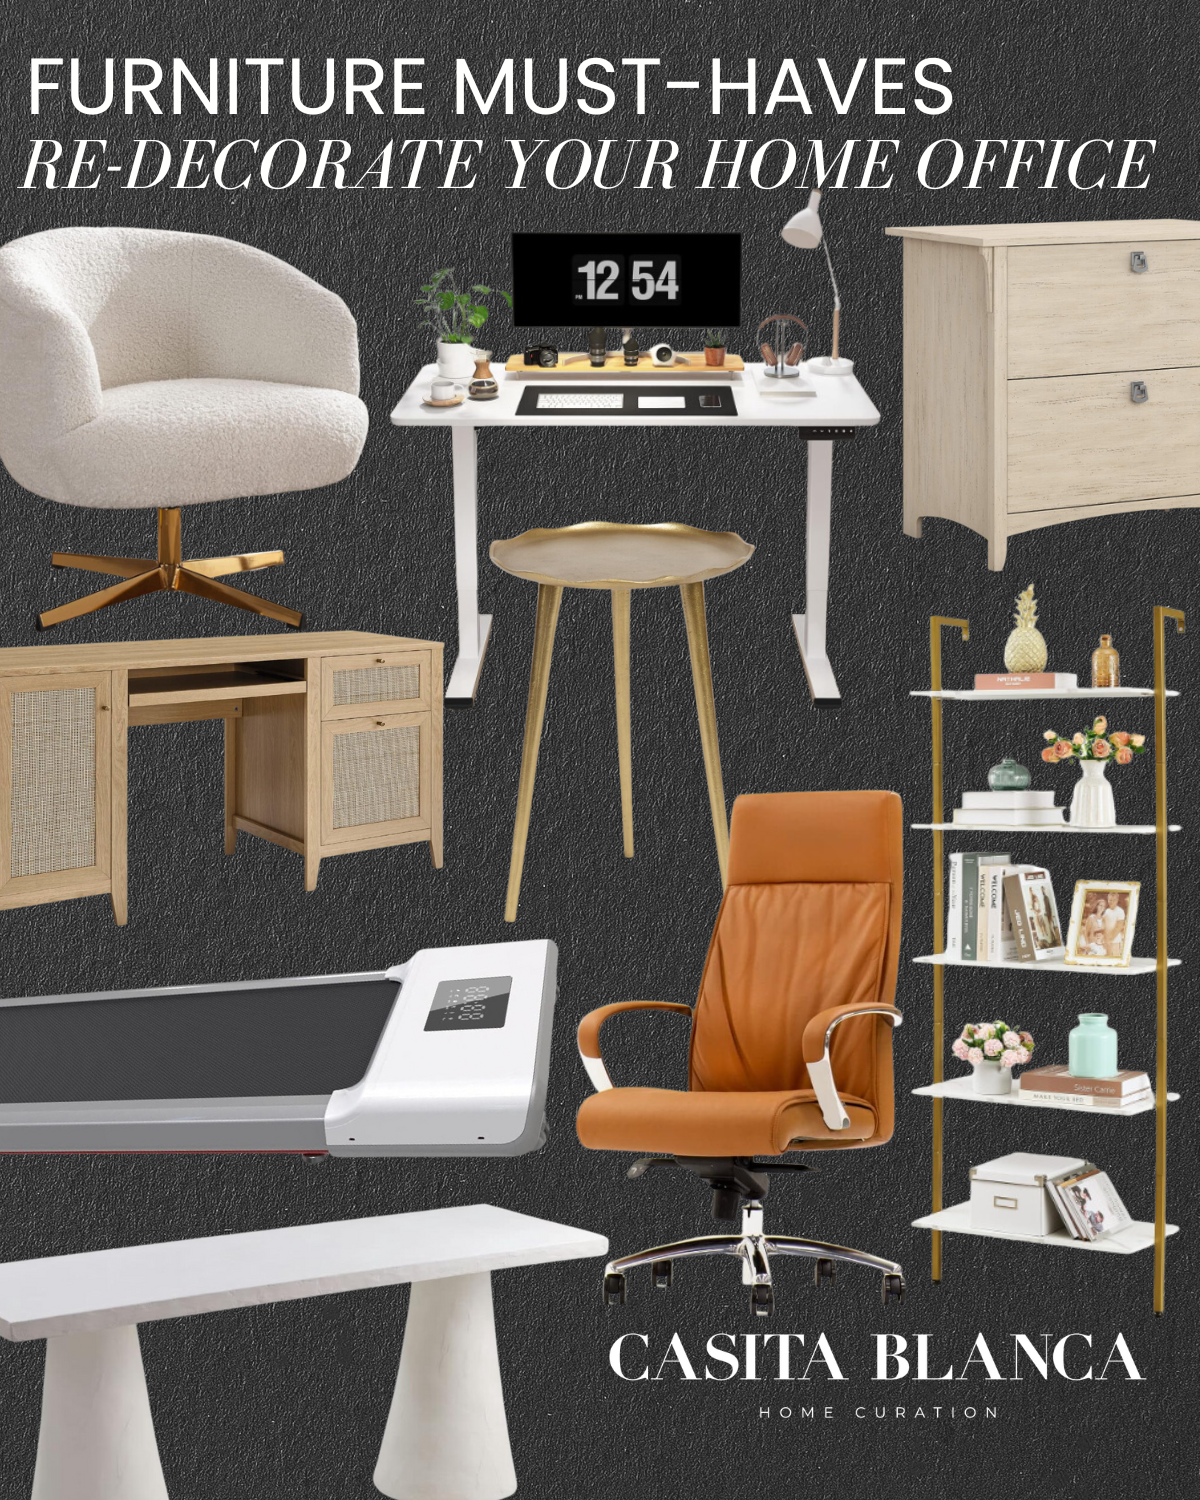 re-decorate and organize your home | home, home office, re-decorate, organization, organize, storage, desk chair, desk, bookshelf, accent table